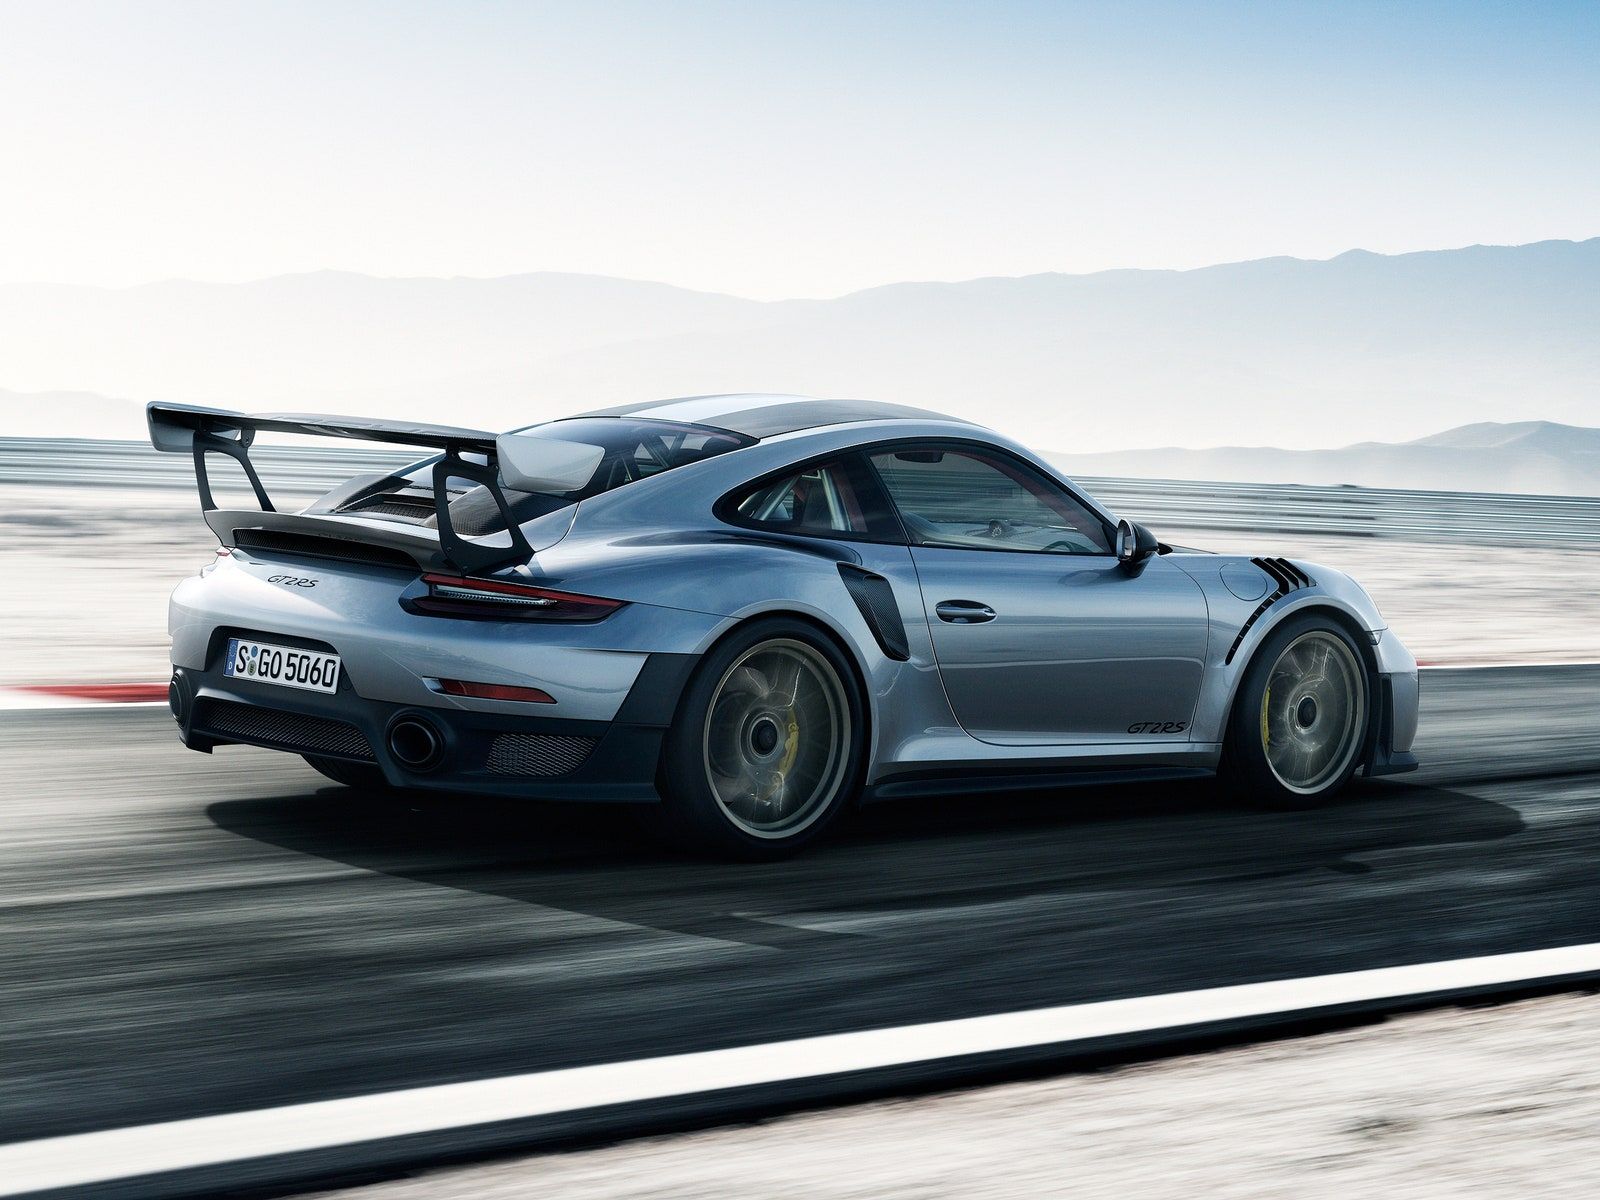 The Porsche 911 GT2 RS has Outstanding features